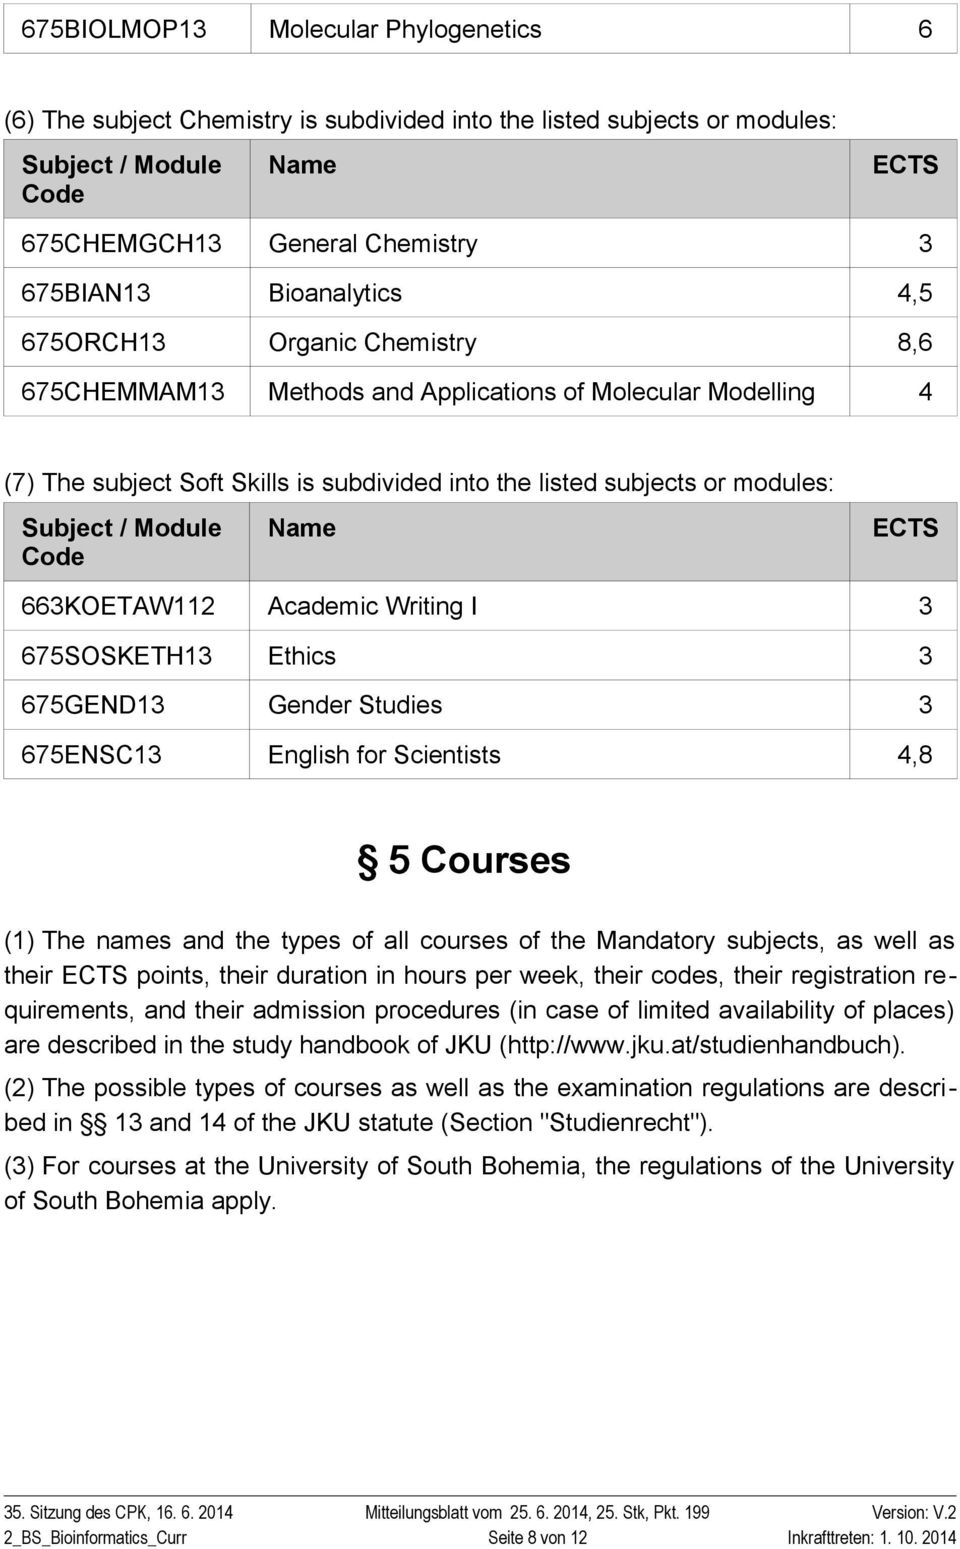 66KOETAW112 Academic Writing I 675SOSKETH1 Ethics 675GEND1 Gender Studies 675ENSC1 English for Scientists 4,8 5 Courses (1) The names and the types of all courses of the Mandatory subjects, as well